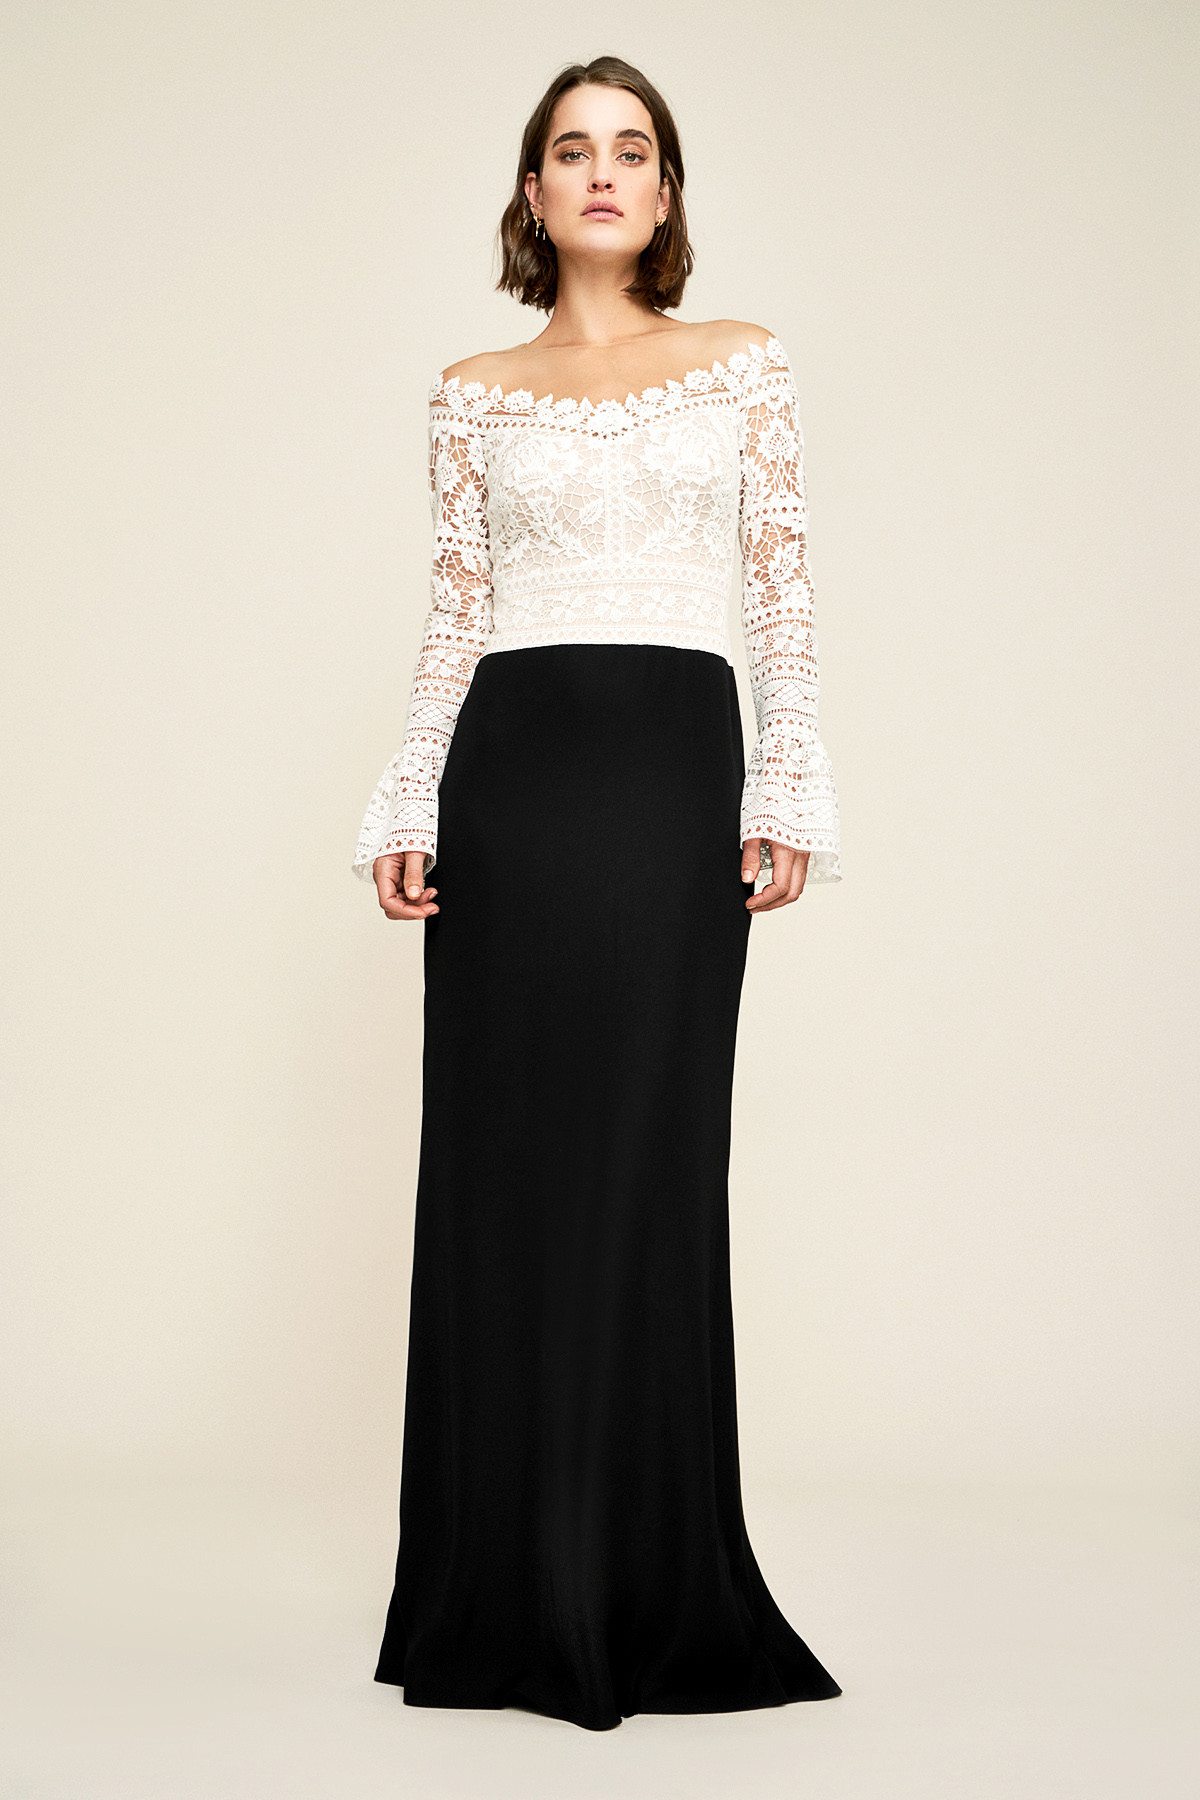 Short haired brunette model posing in delicate white peasant lace sleeves and black skirt Tadashi Shoji gown